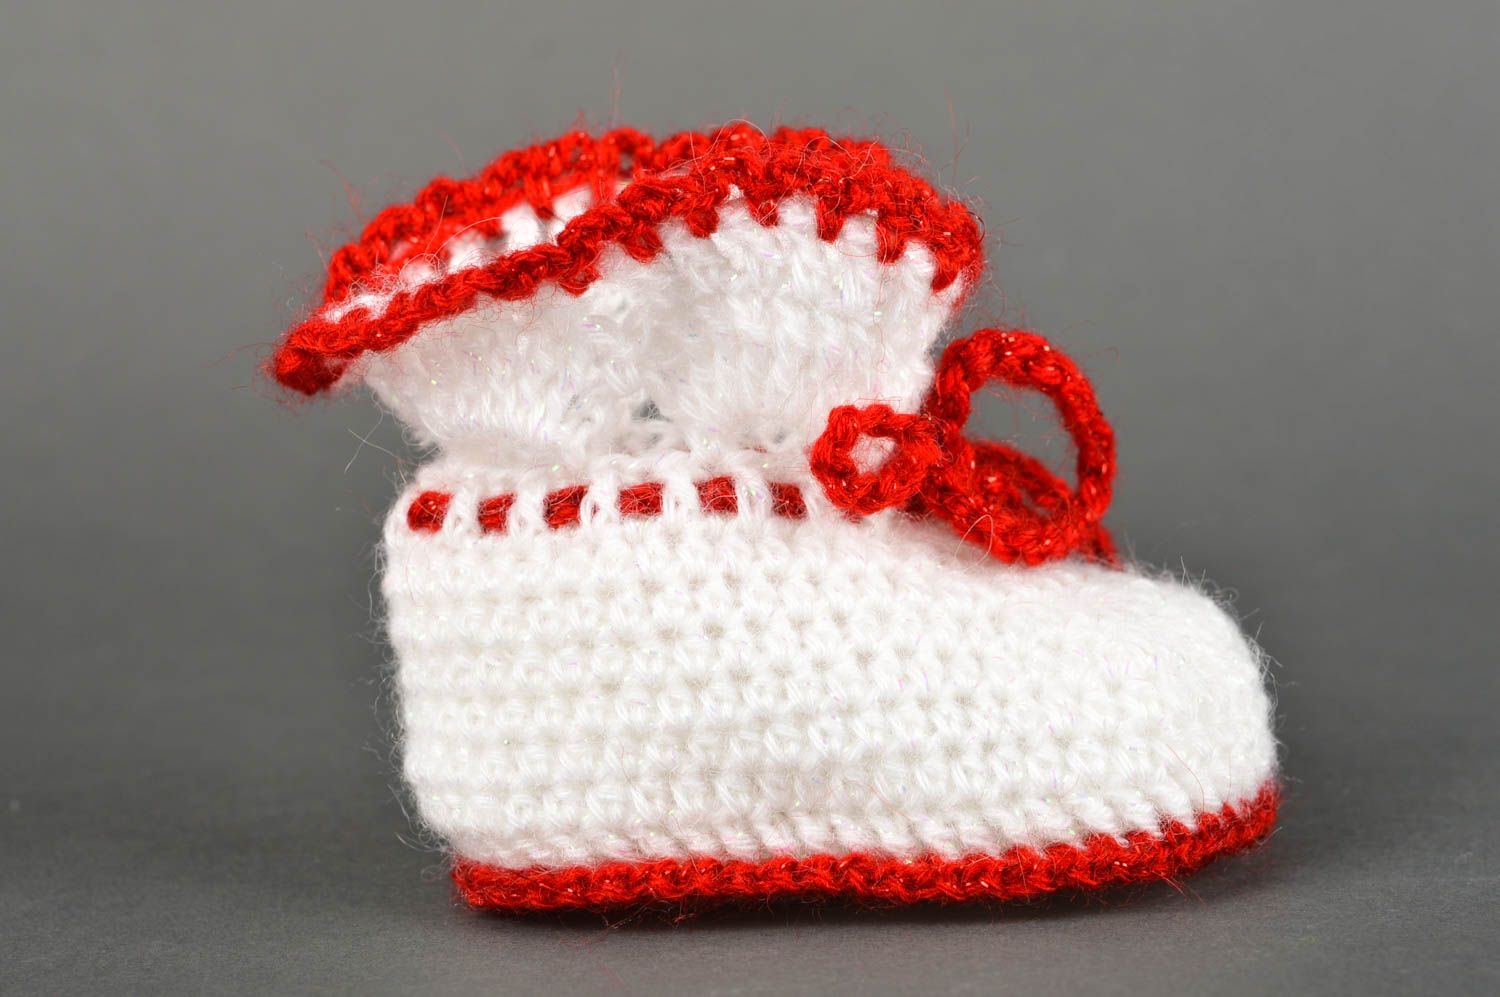 Handmade crochet baby booties crochet ideas baby accessories gifts for kids photo 3